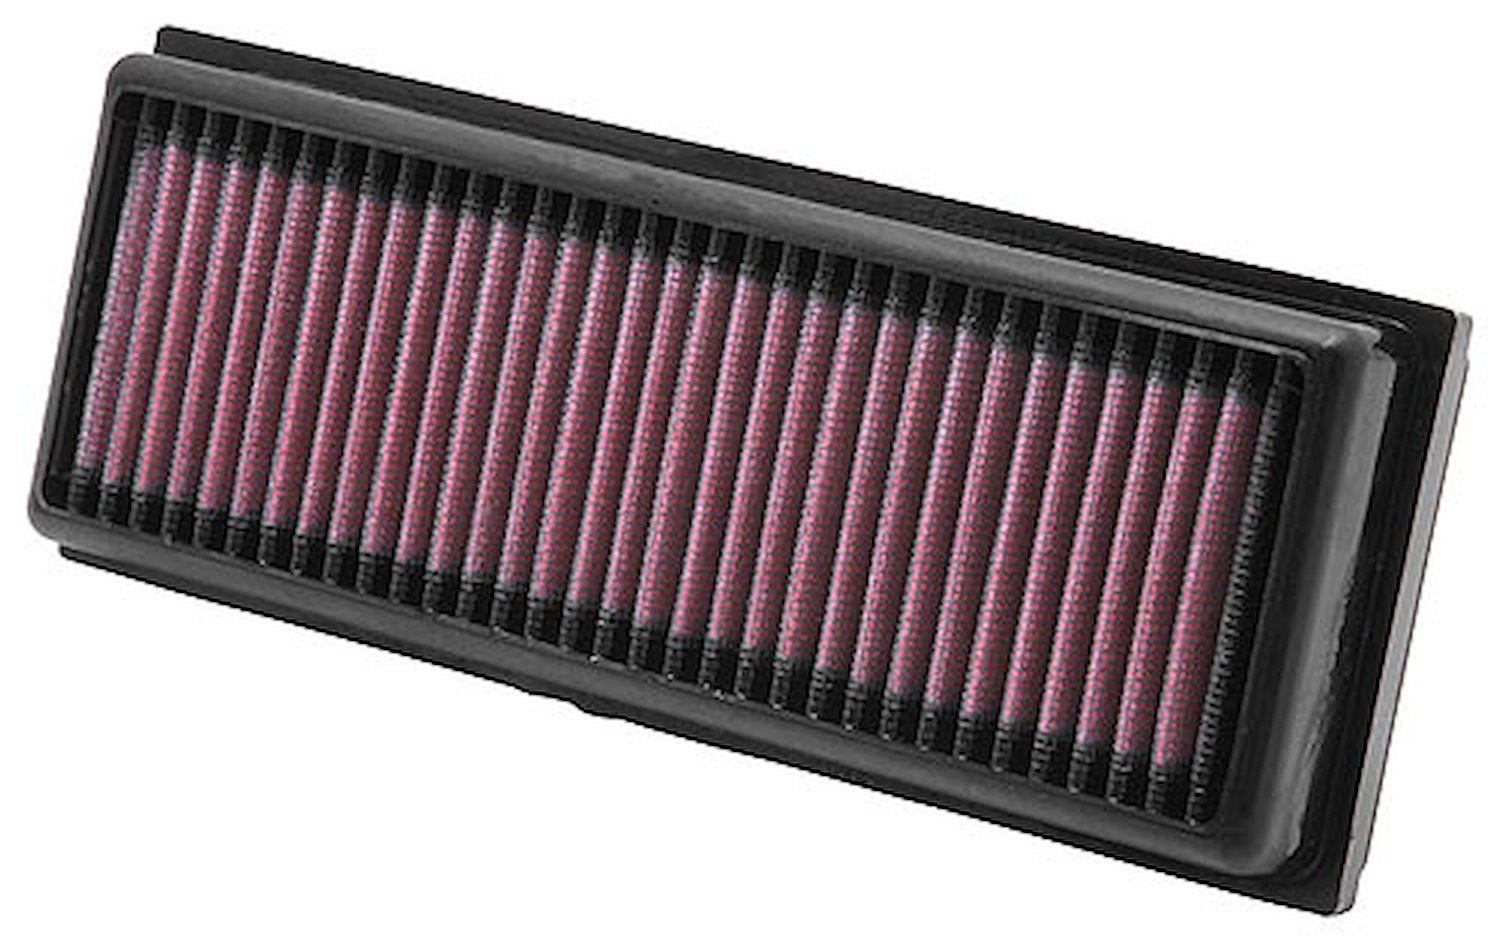 K&N s replacement air filters are designed to